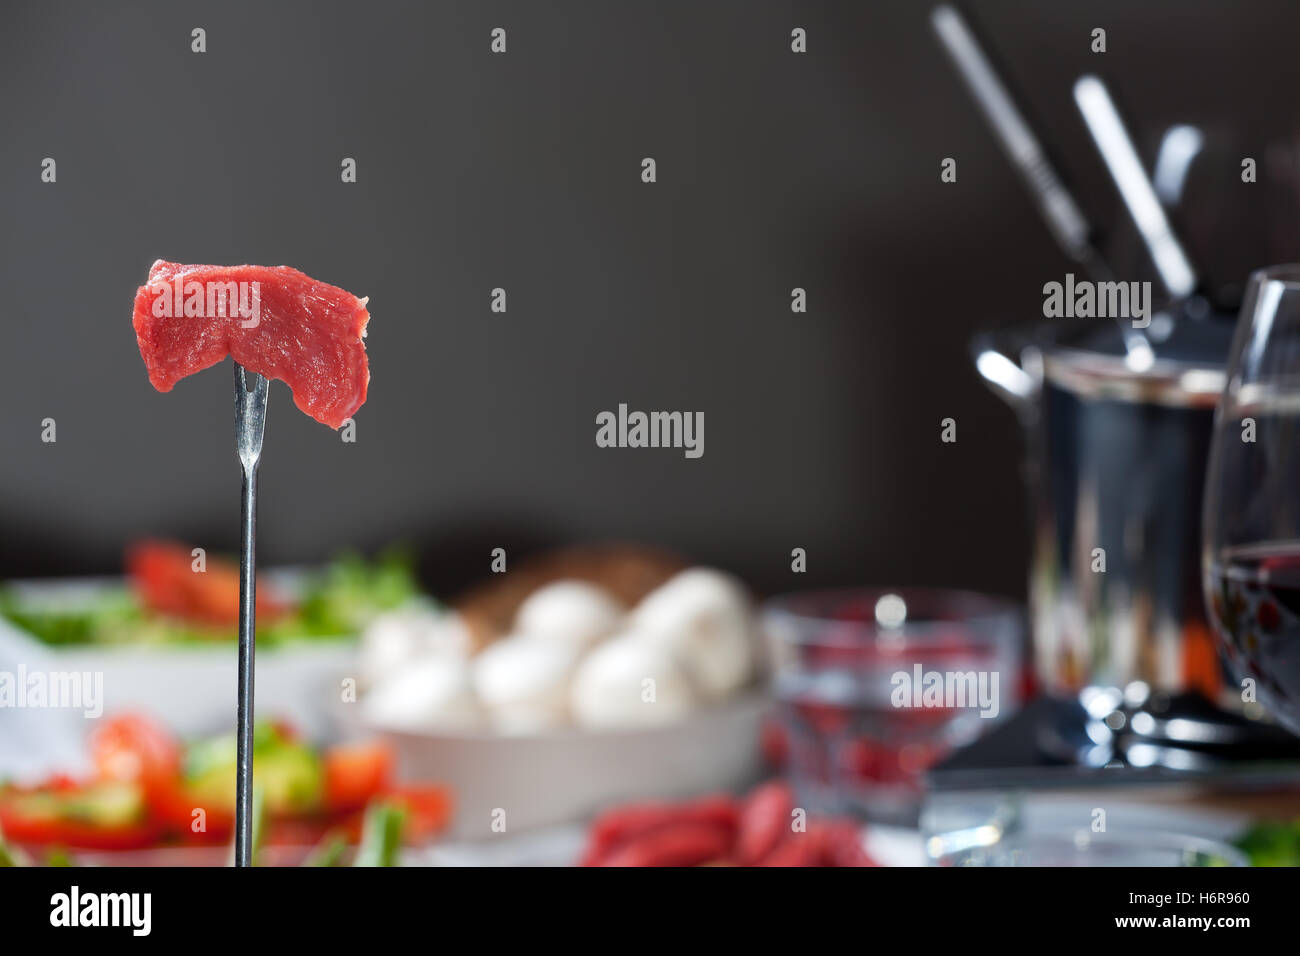 fondue fork with meat Stock Photo